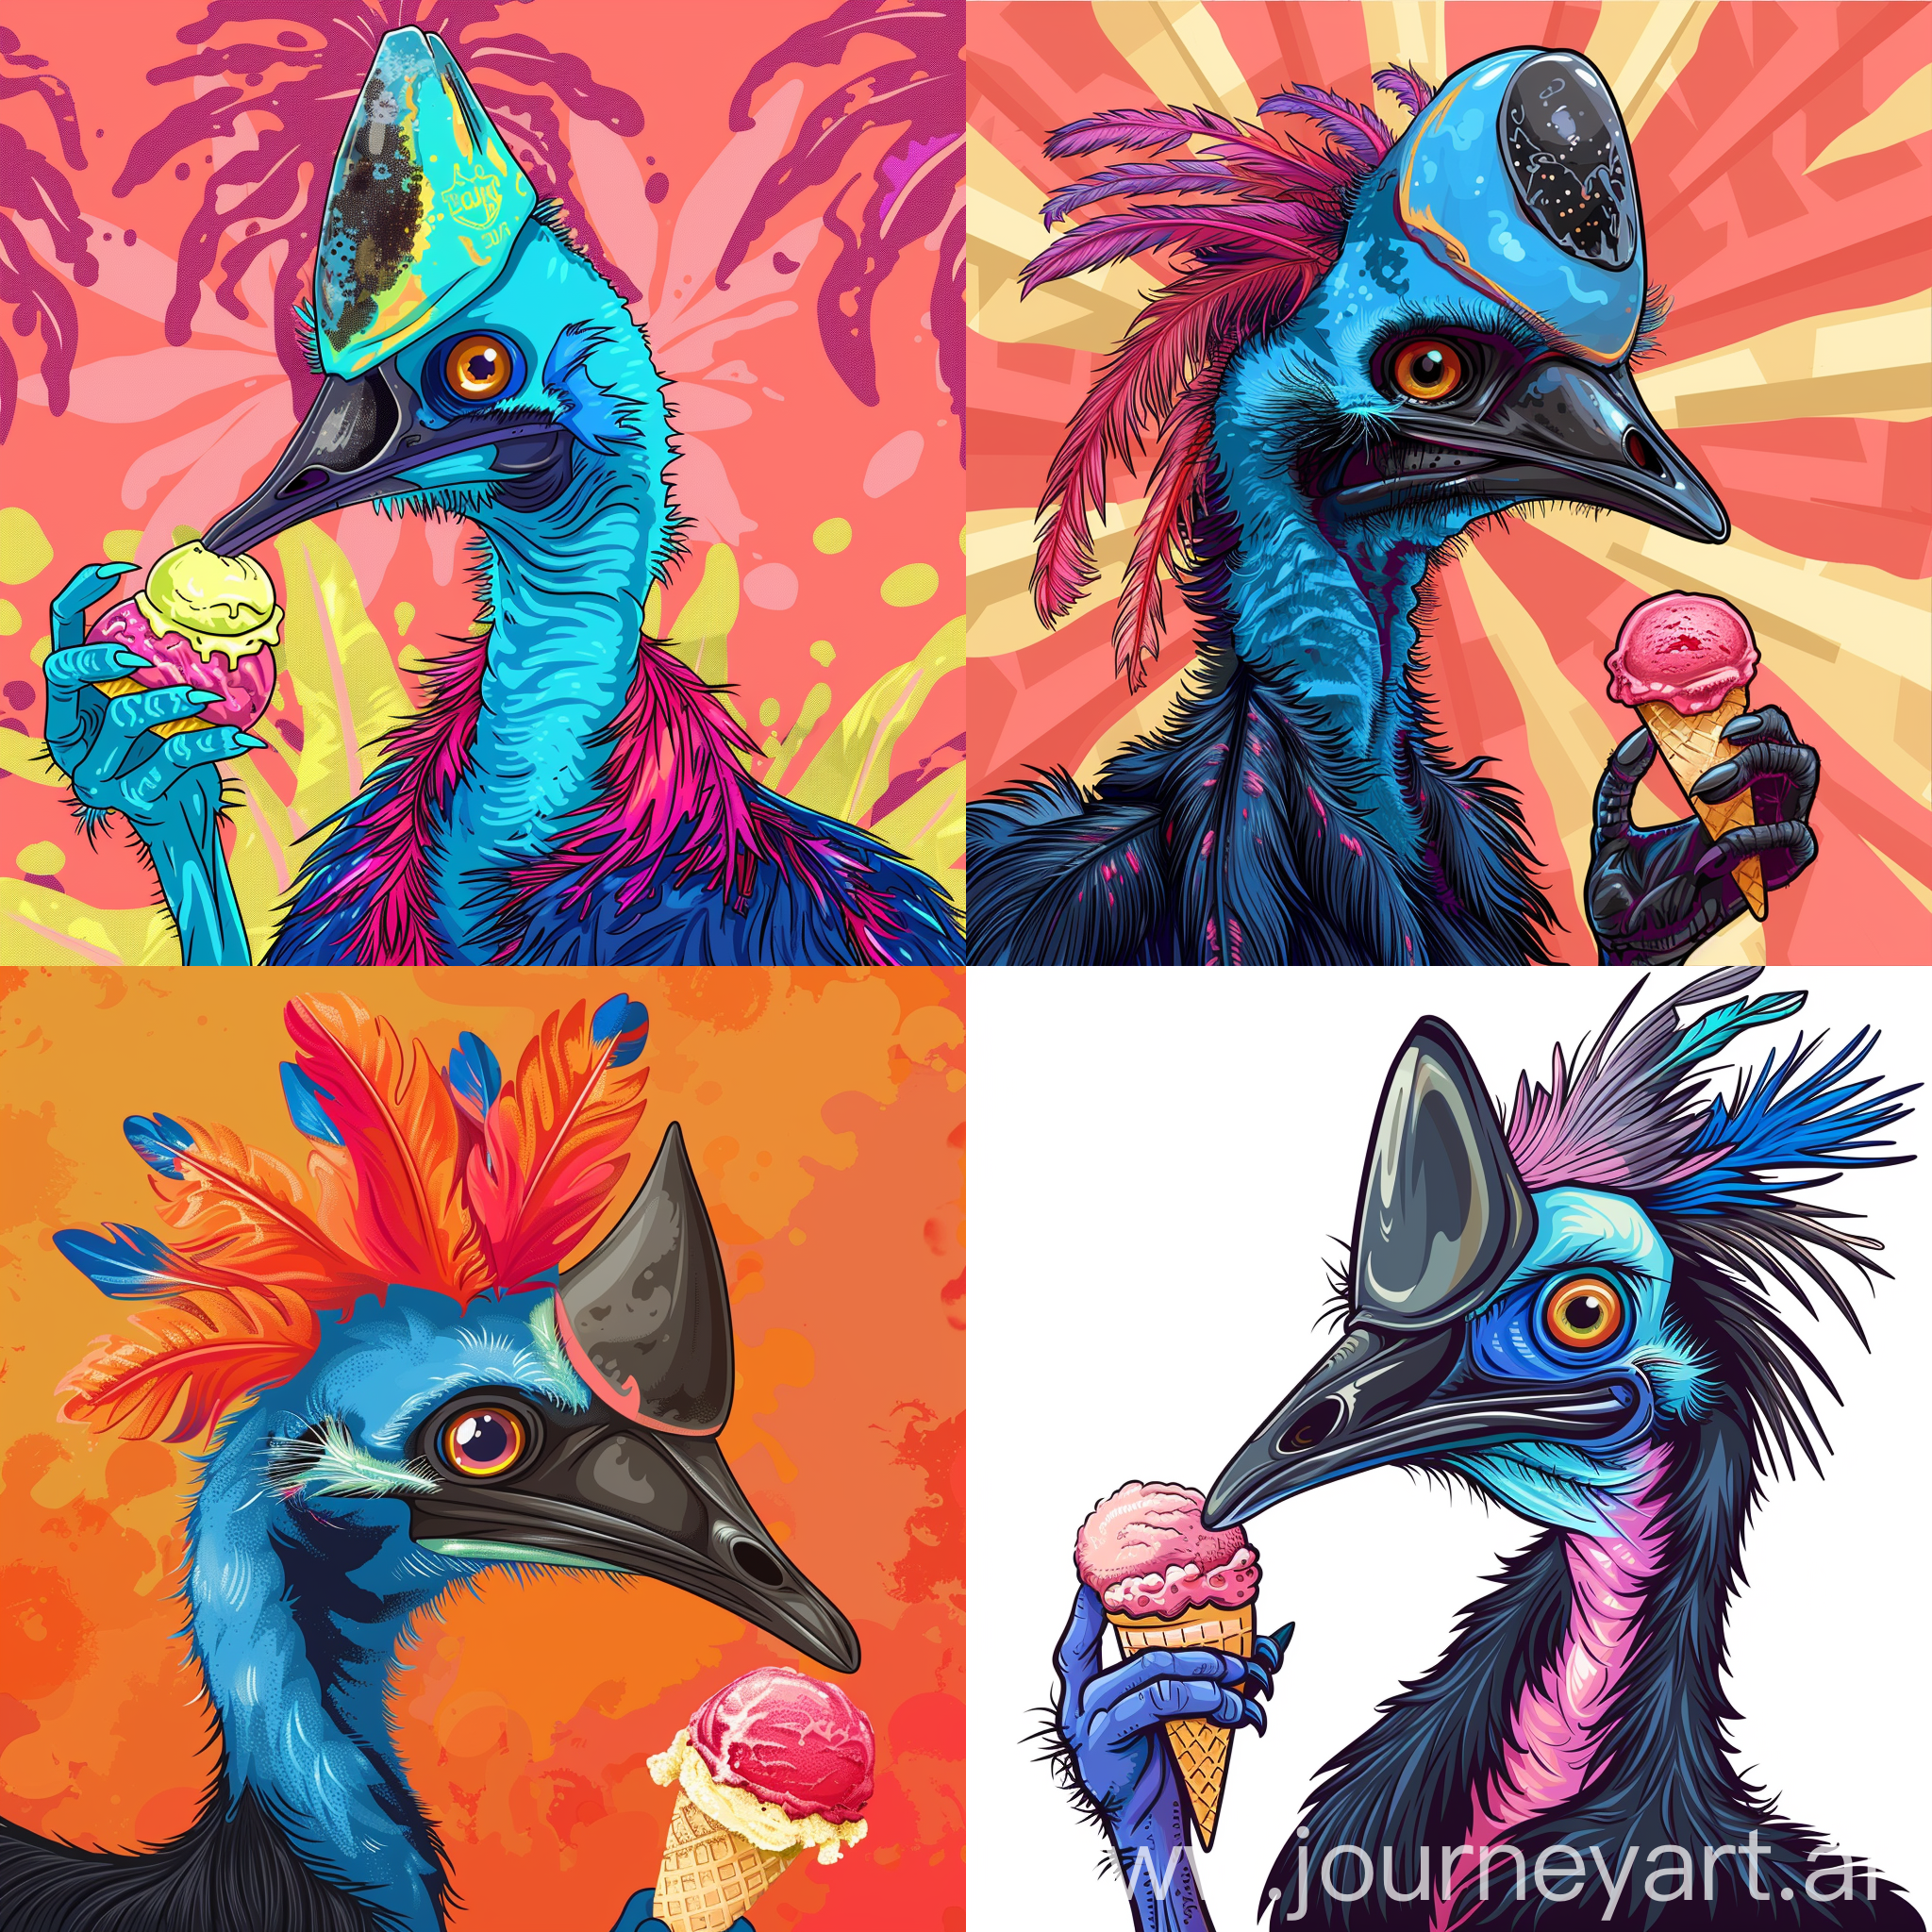 Cartoon of a side profit cassowary tough looking eating an ice cream 90s theme with bright feathers